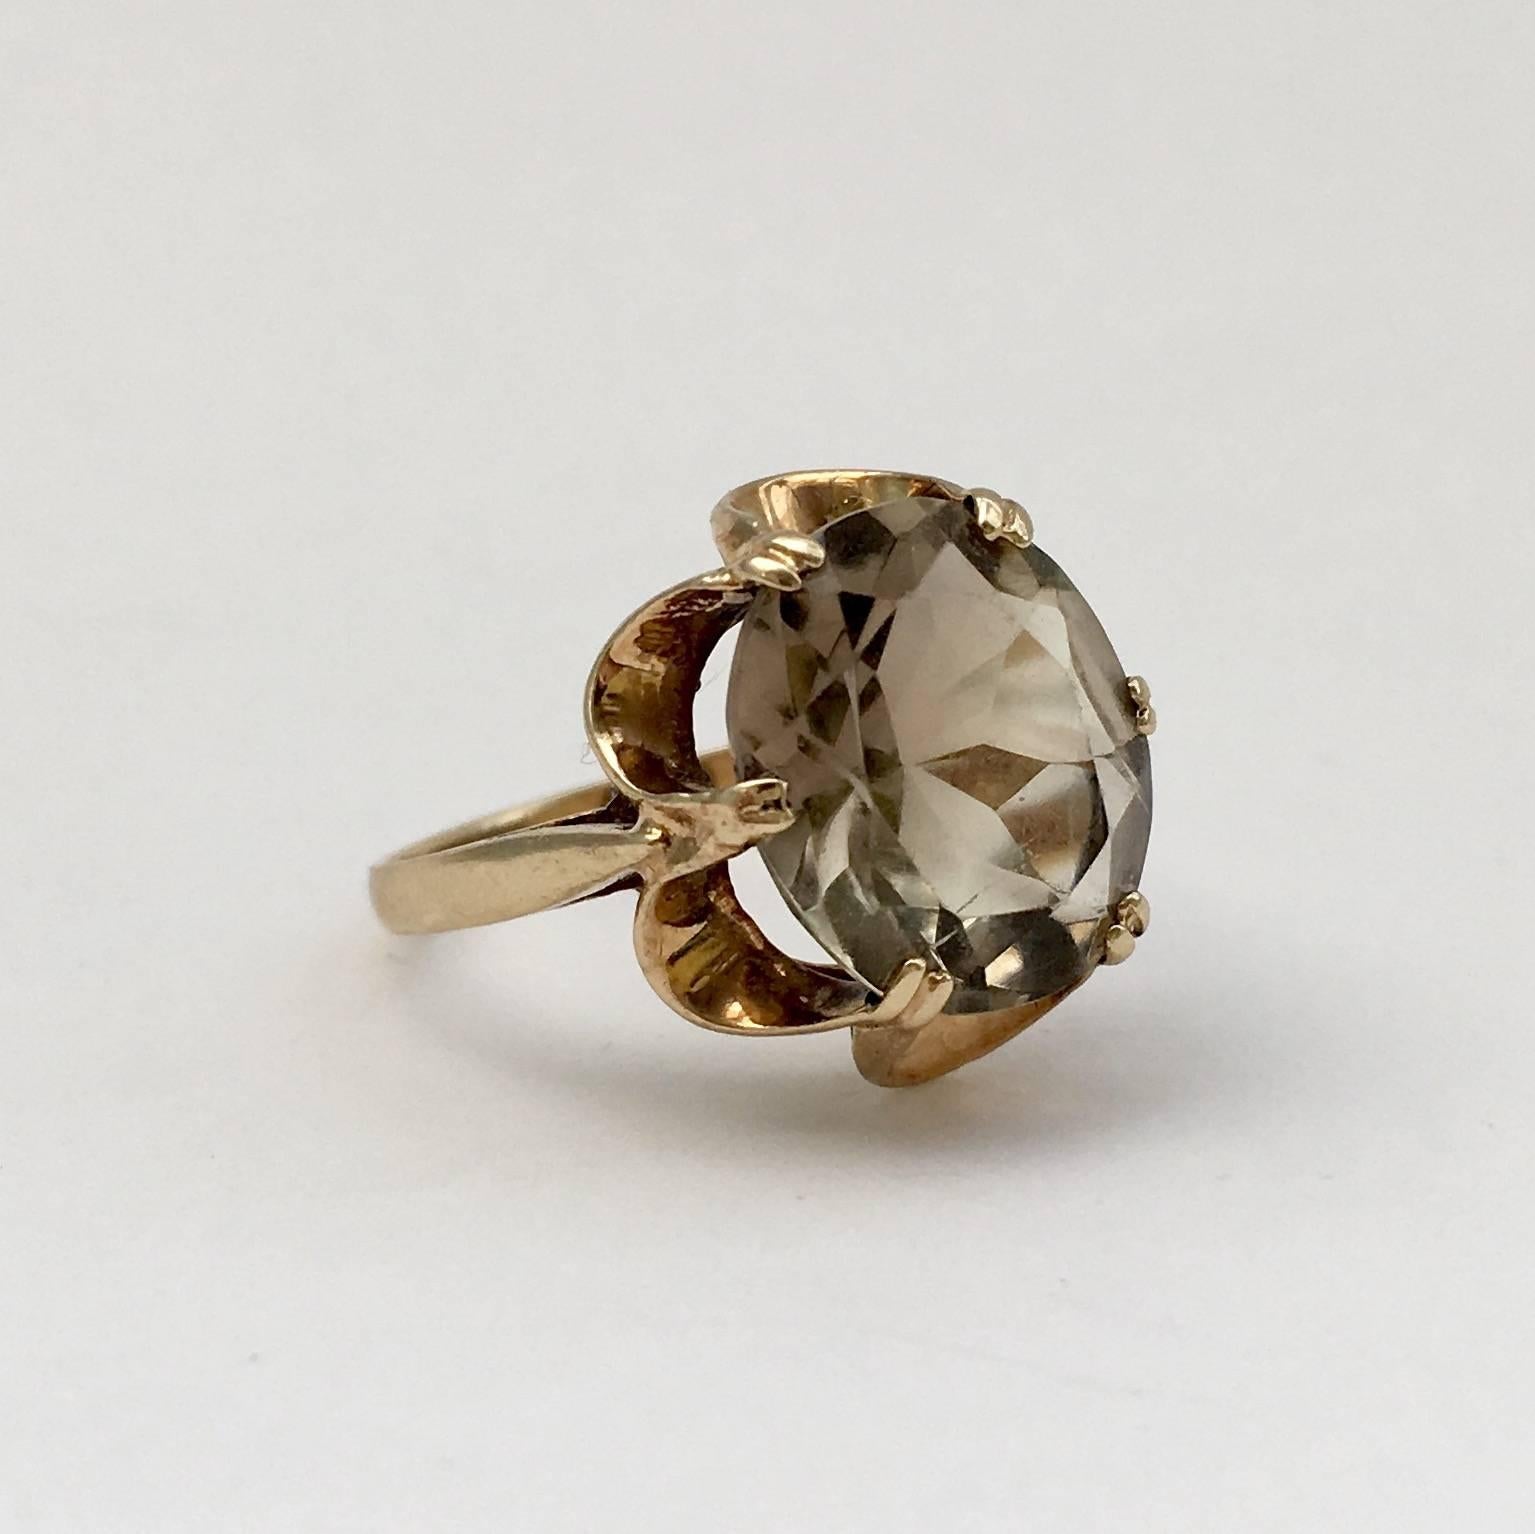 The stylish design of this 9ct gold ring is typical of its era. It combines smoky seventies hues with a lovely scalloped flower setting, no doubt inspired by nature. The faceted gemstone perches high on its arched mount, giving the ring a beautiful